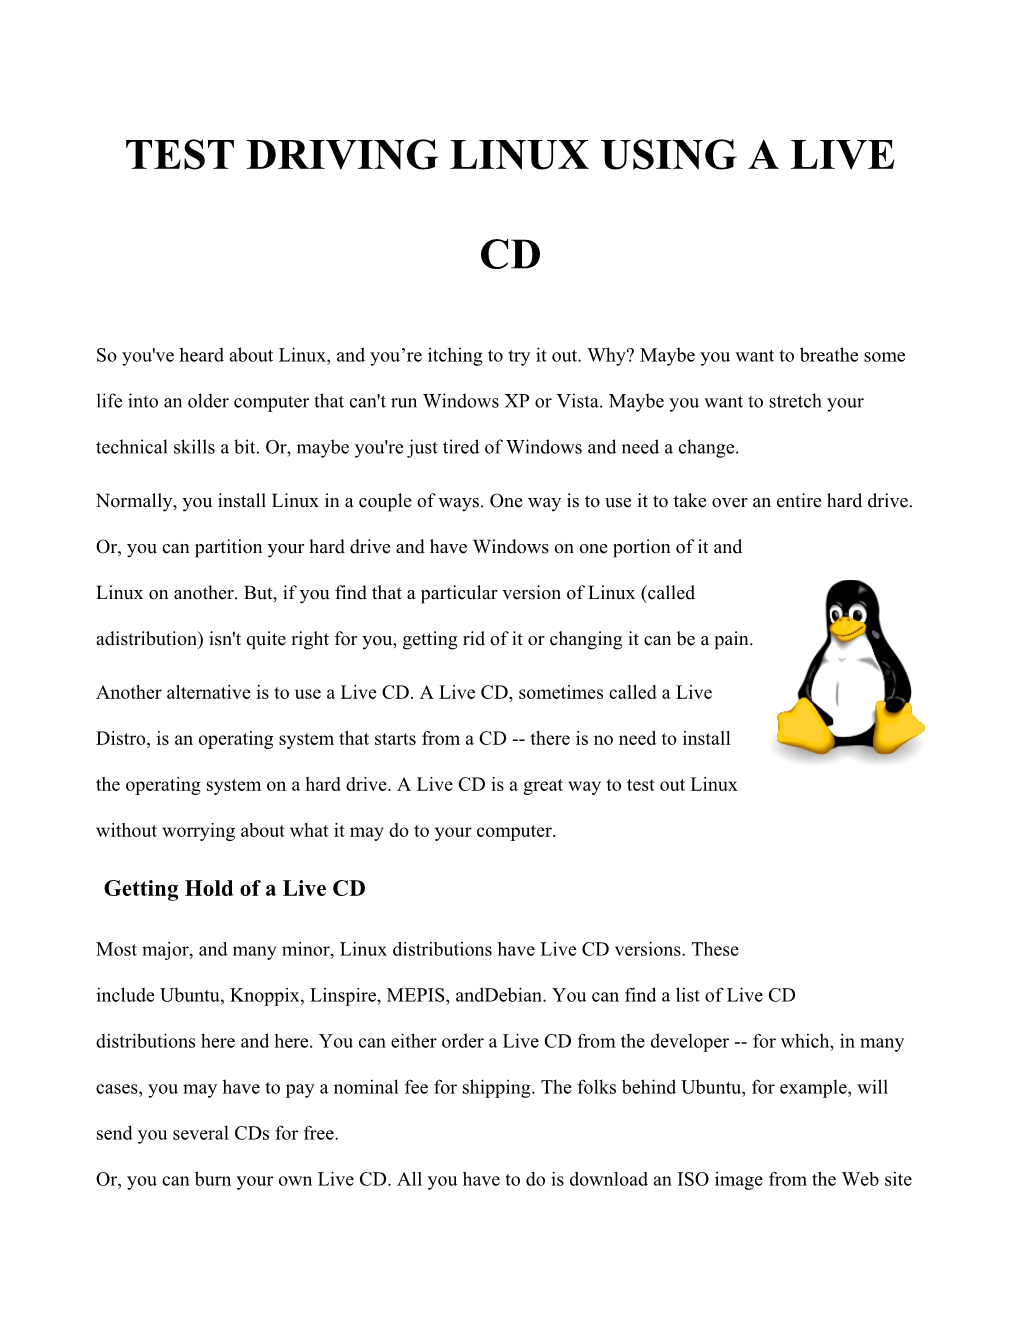 Test Driving Linux Using a Live Cd